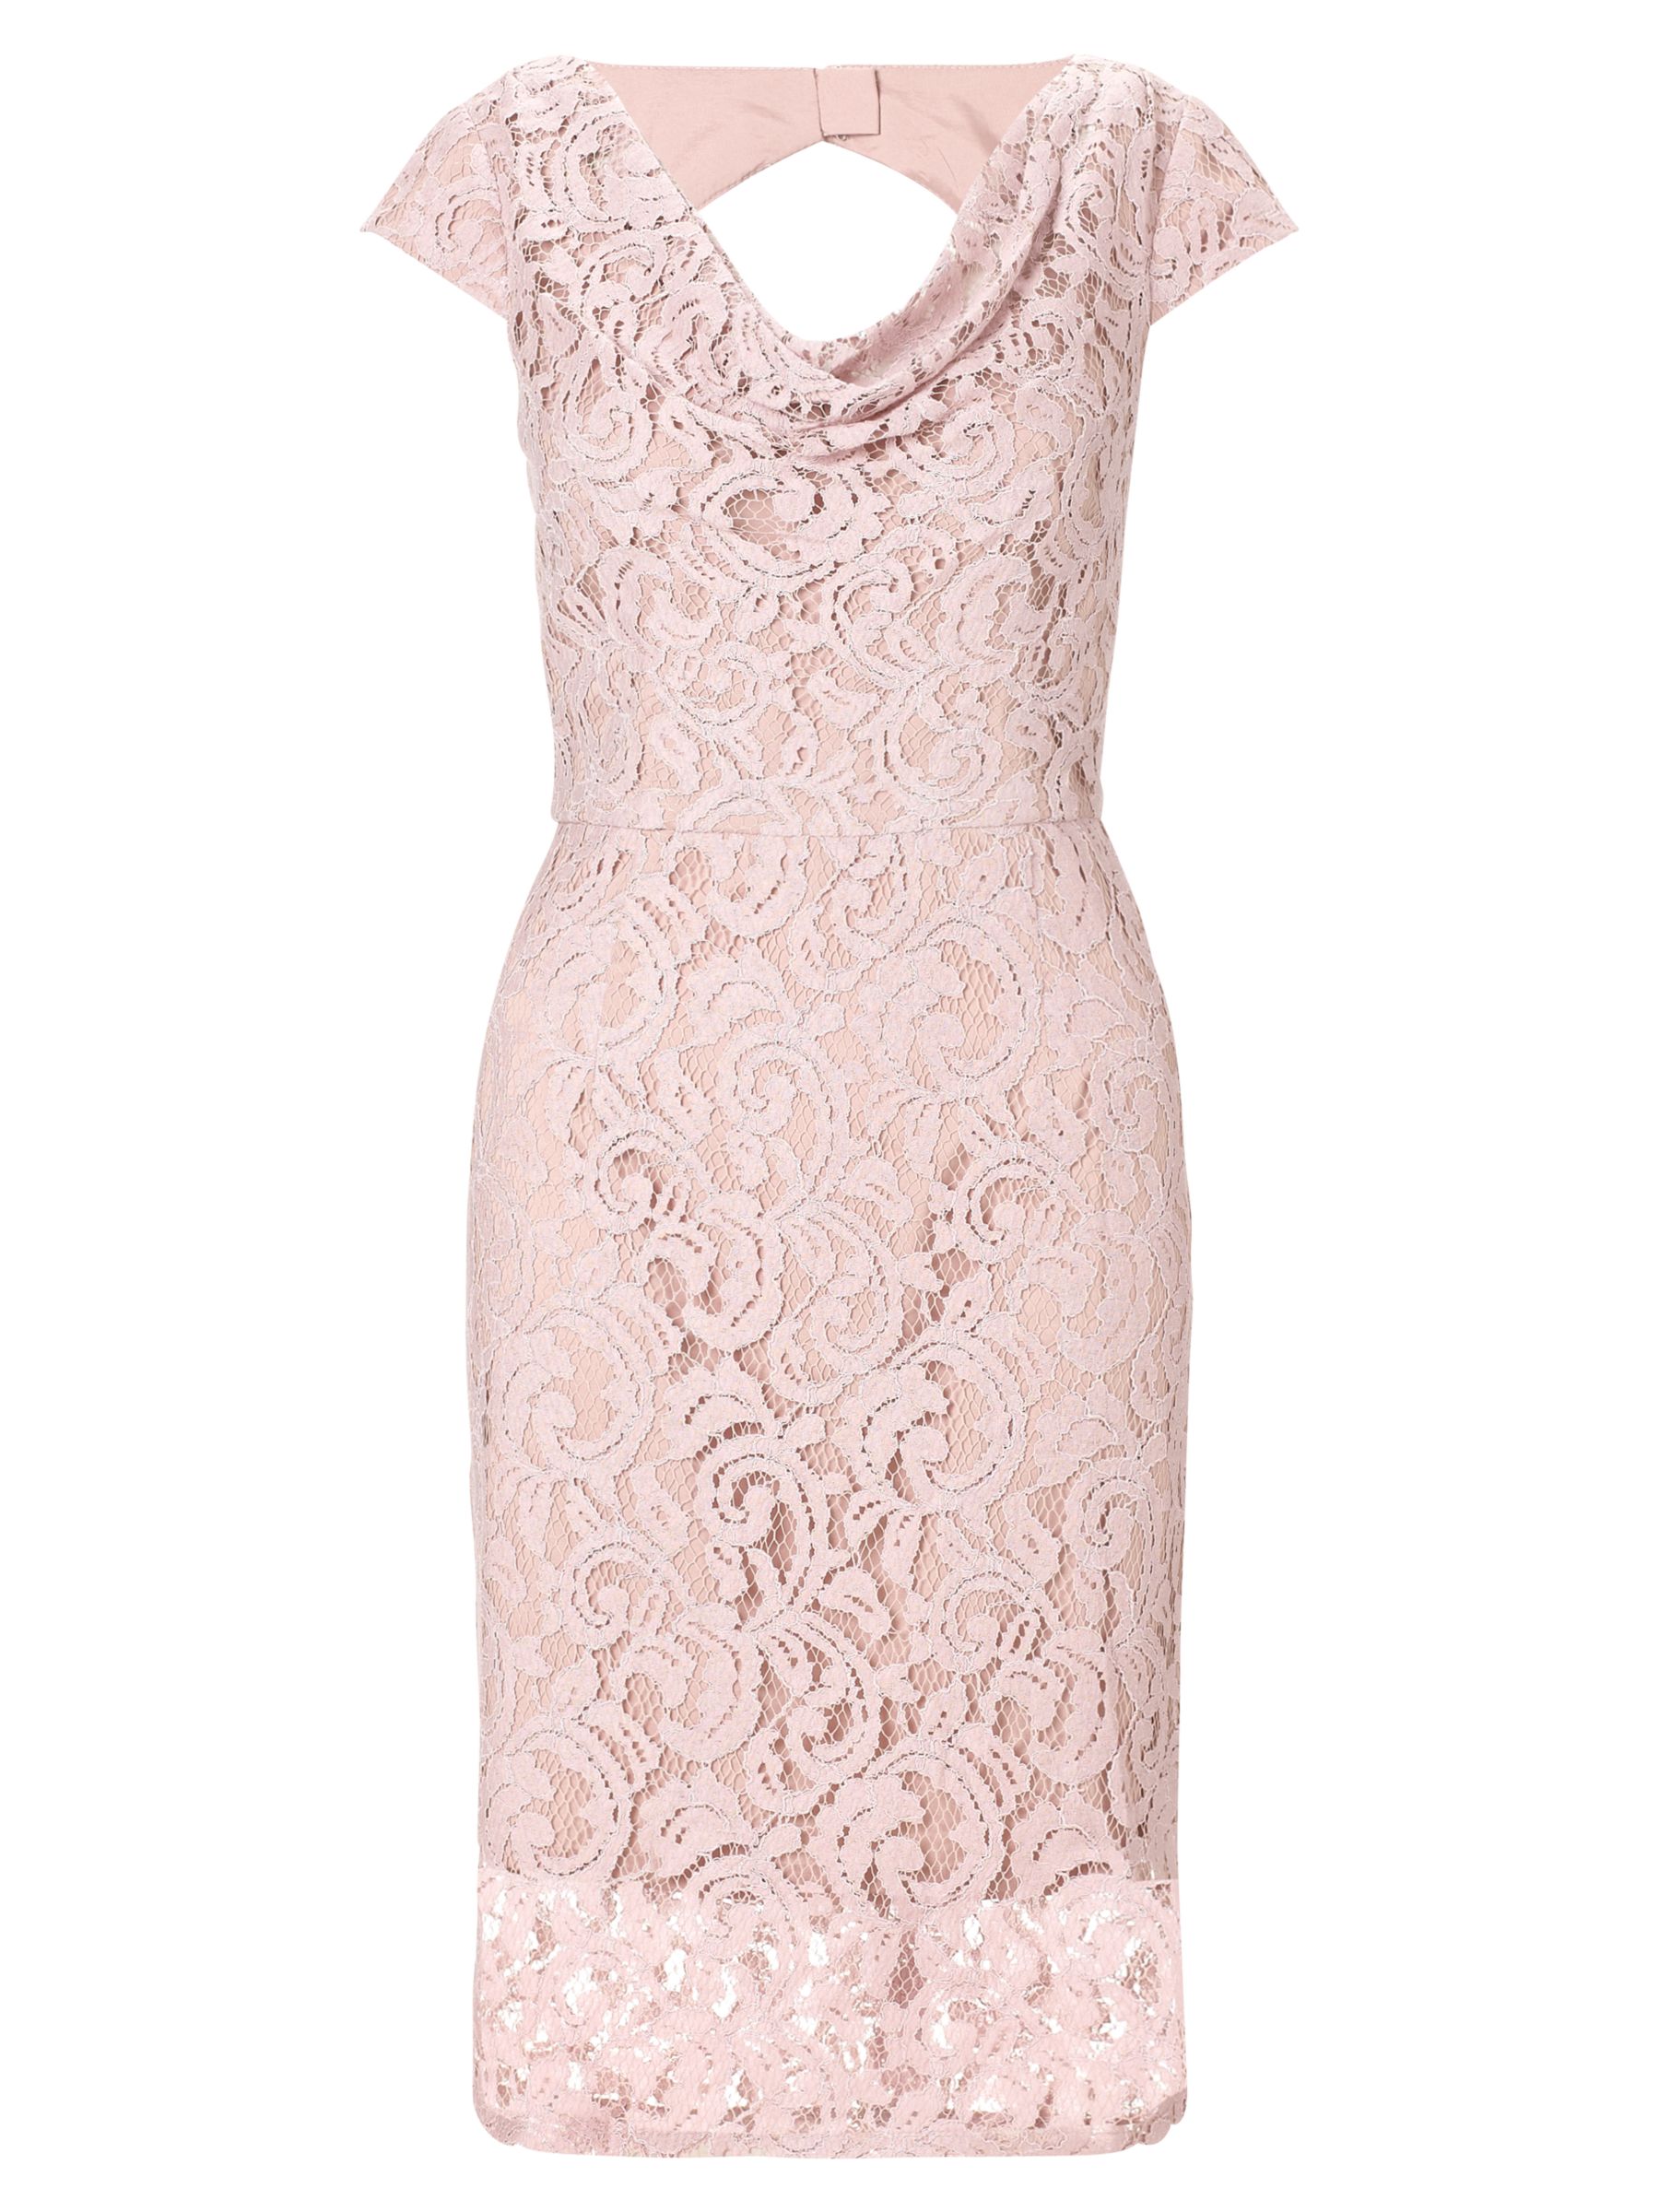 Adrianna Papell Illusion Lace Dress, Putty at John Lewis & Partners